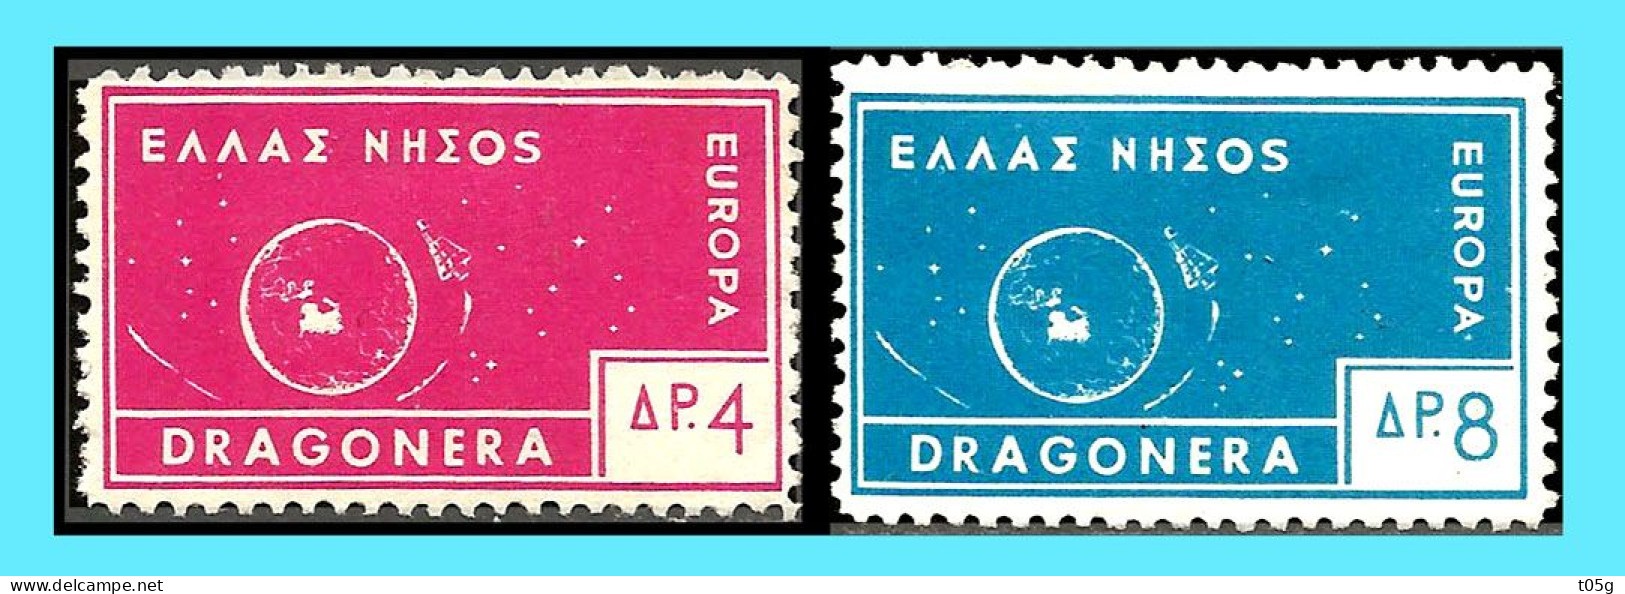 GREECE-GRECE-HELLAS - ITALY- IONIAN DRAGONERA ISLAND -EUROPA 1963: Unofficial -private Issue - Compl. Set  MNH** - Neufs